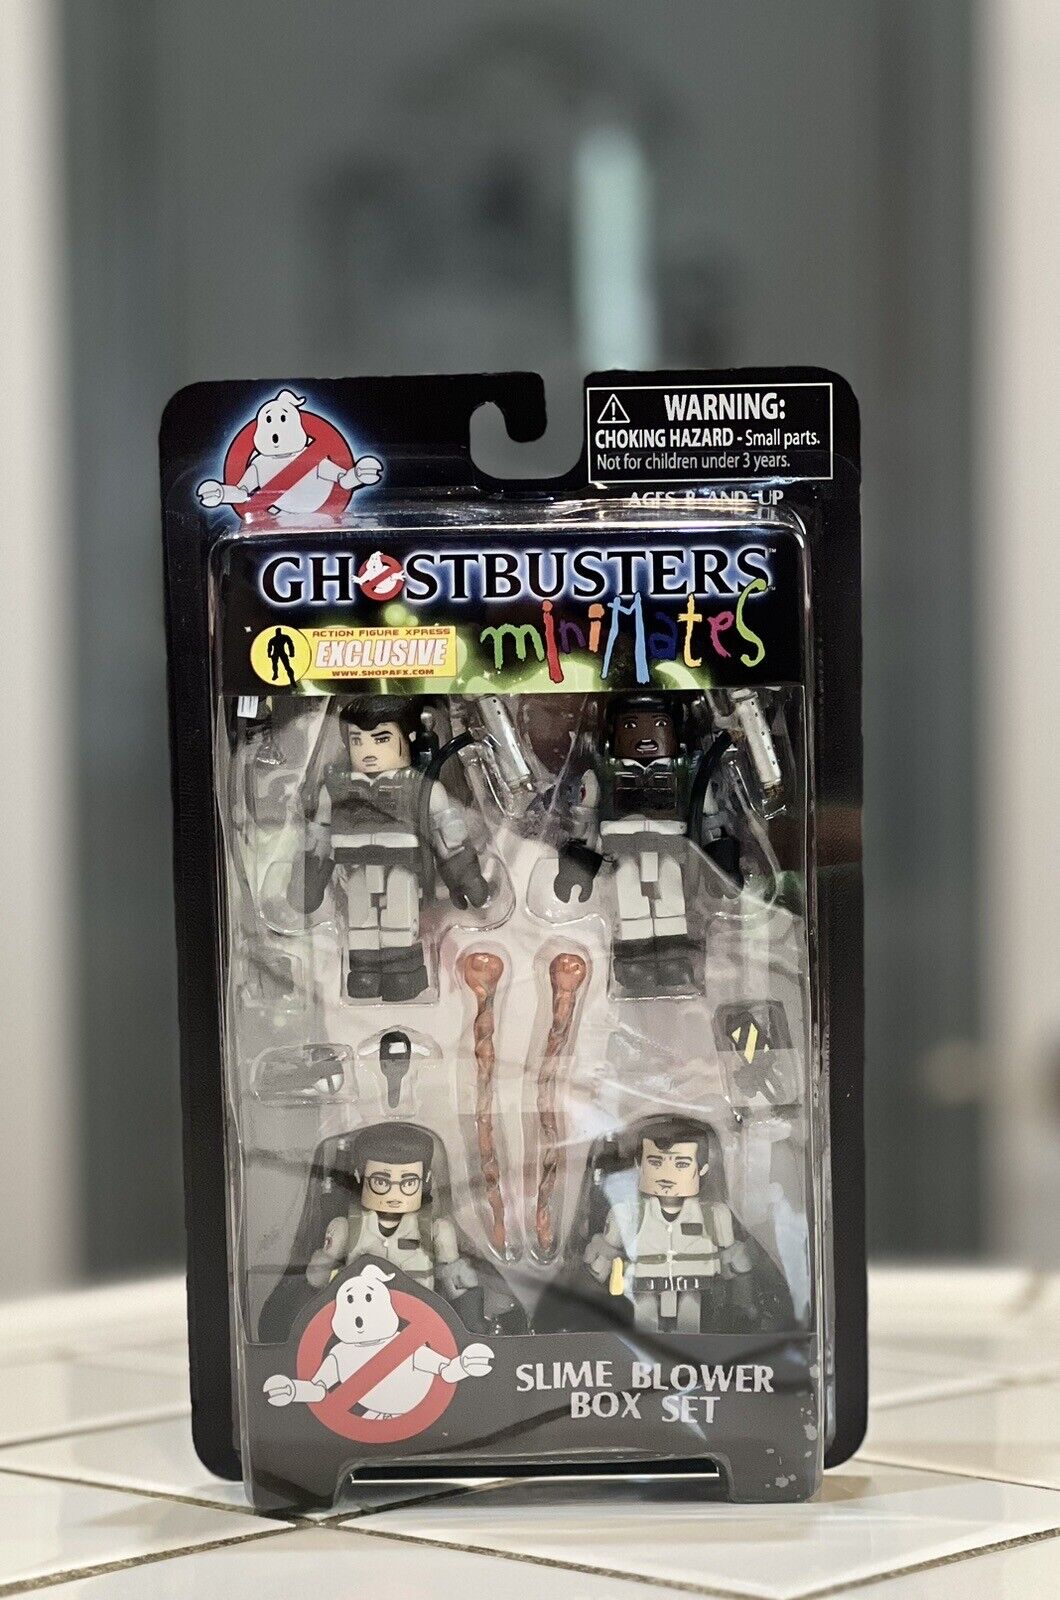 2010 Ghostbusters Minimates Slime Blower  Exclusive Box Set! NRFB!!